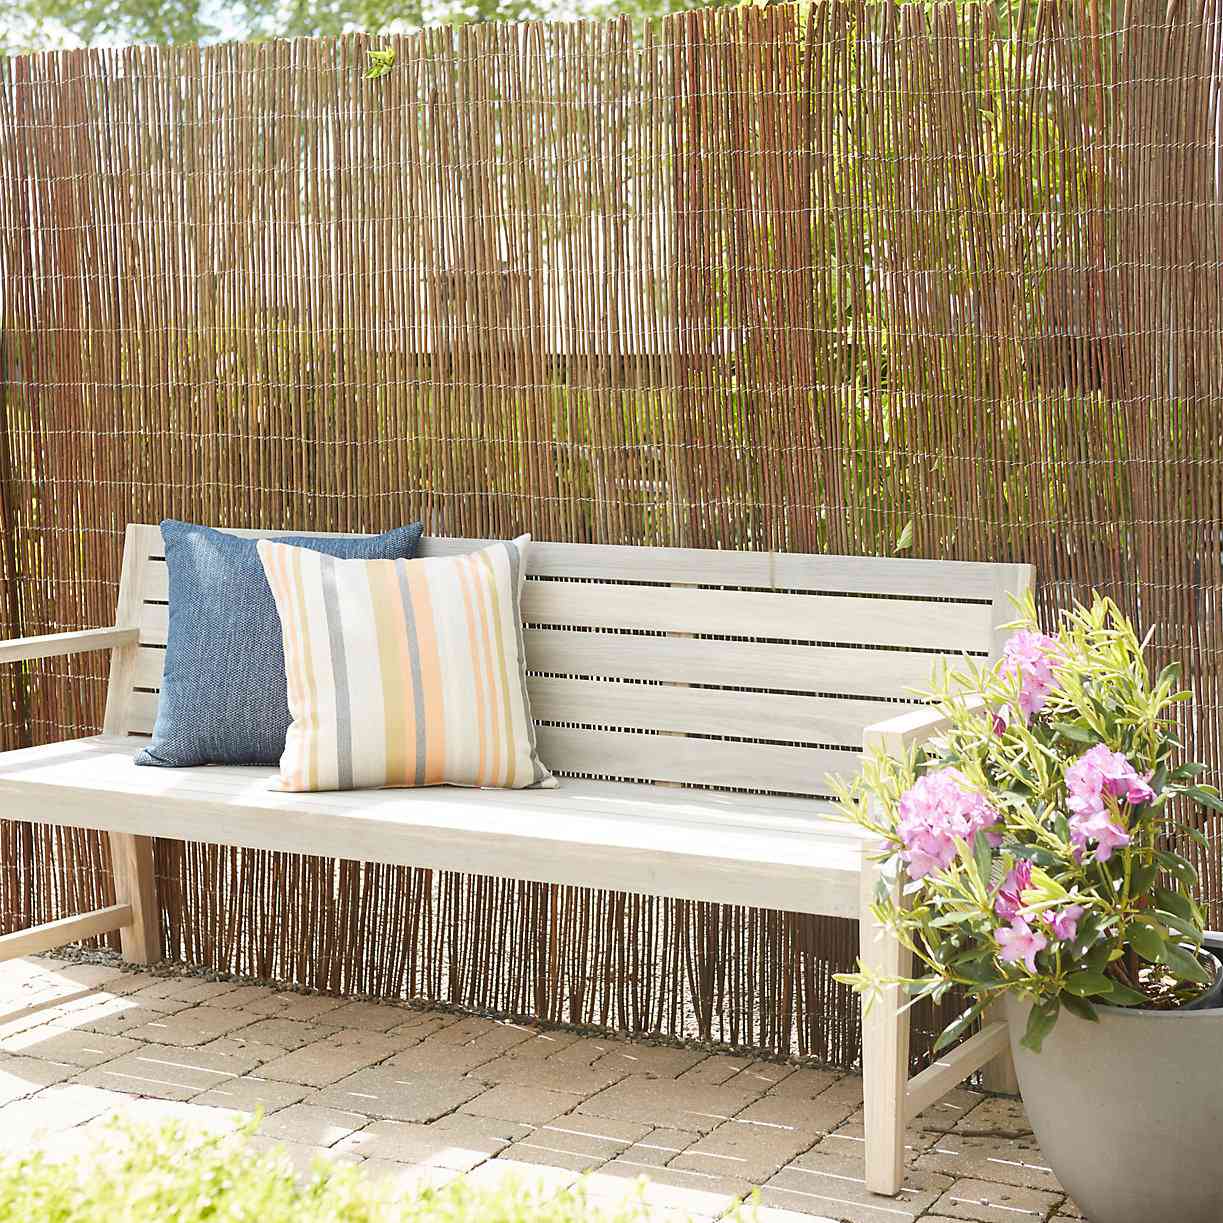 Willow fence and bench with pillows